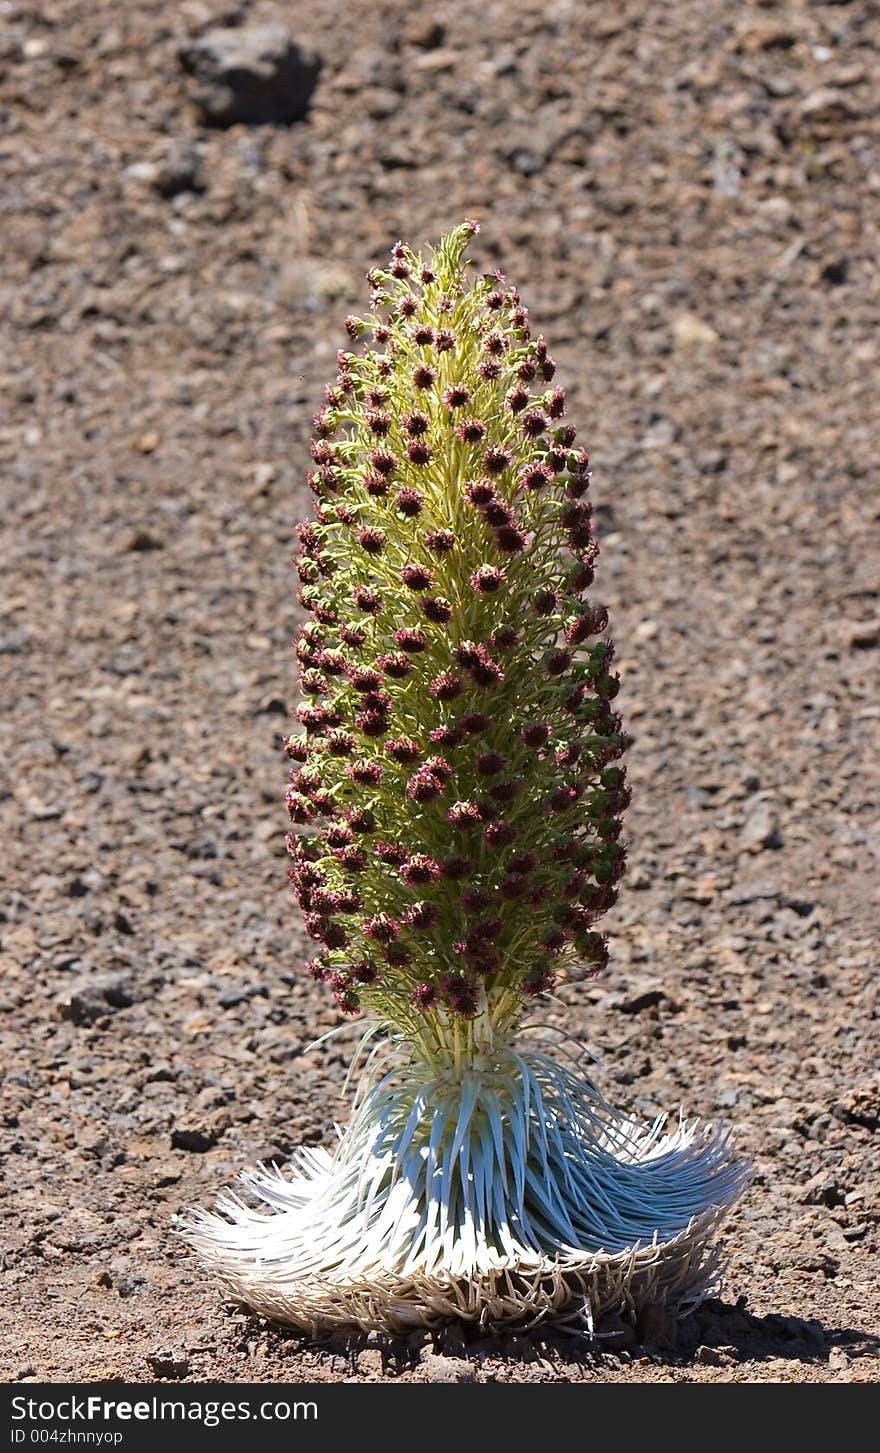 Hawaiian silversword in full bloom. The plant flowers only once at the end of its 15 year life. The only place where you can meet one is on desert slops of Haleakala, Maui.